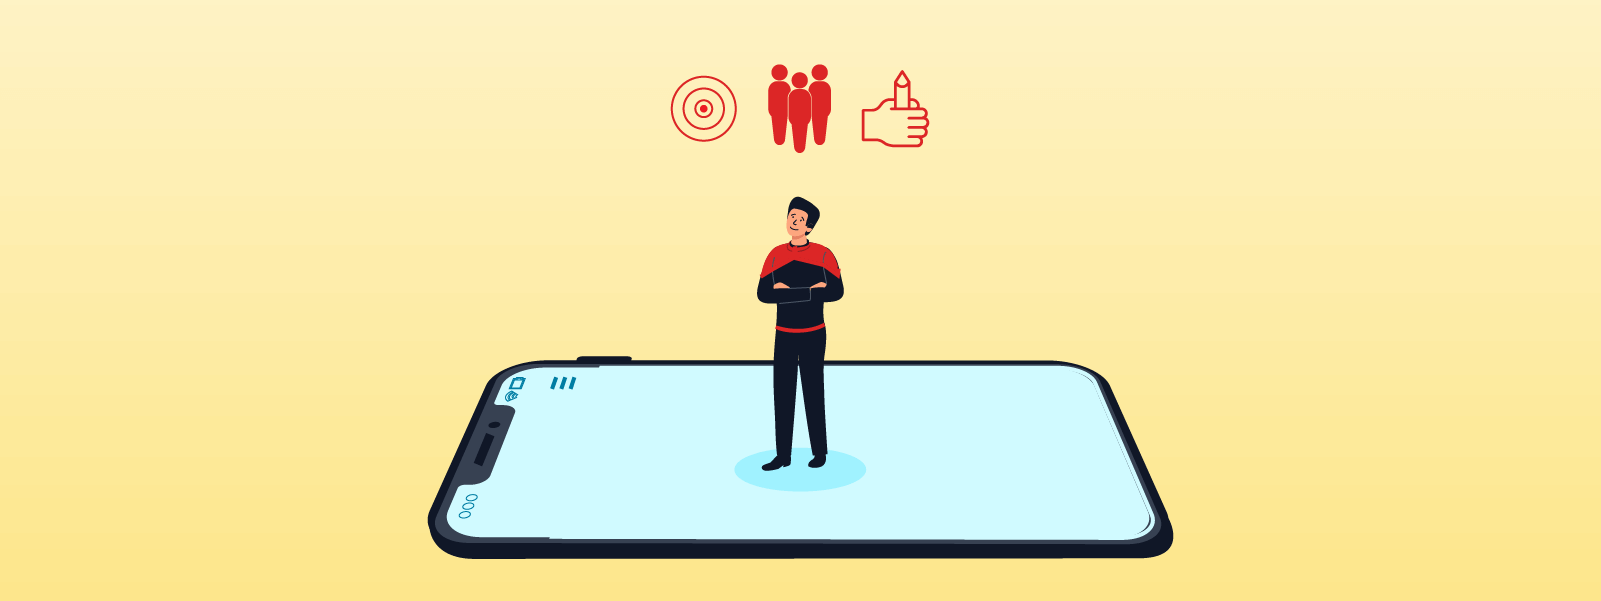 What do gamers value? Illustration of a gaming app user and his values